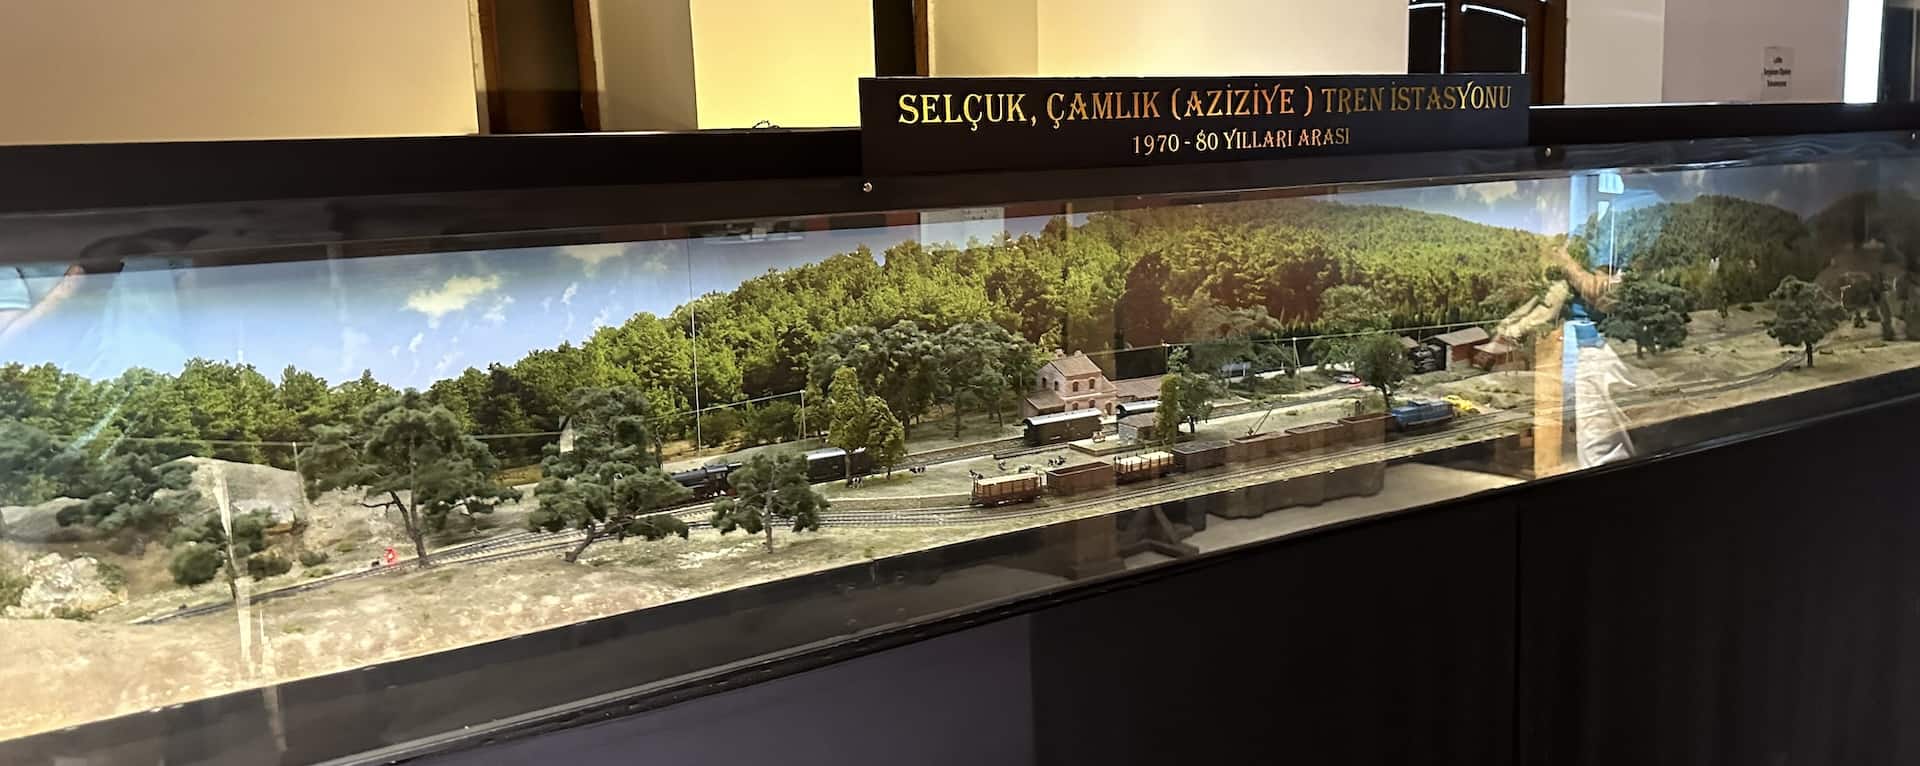 Model of the train station at the Selçuk City Memory Museum